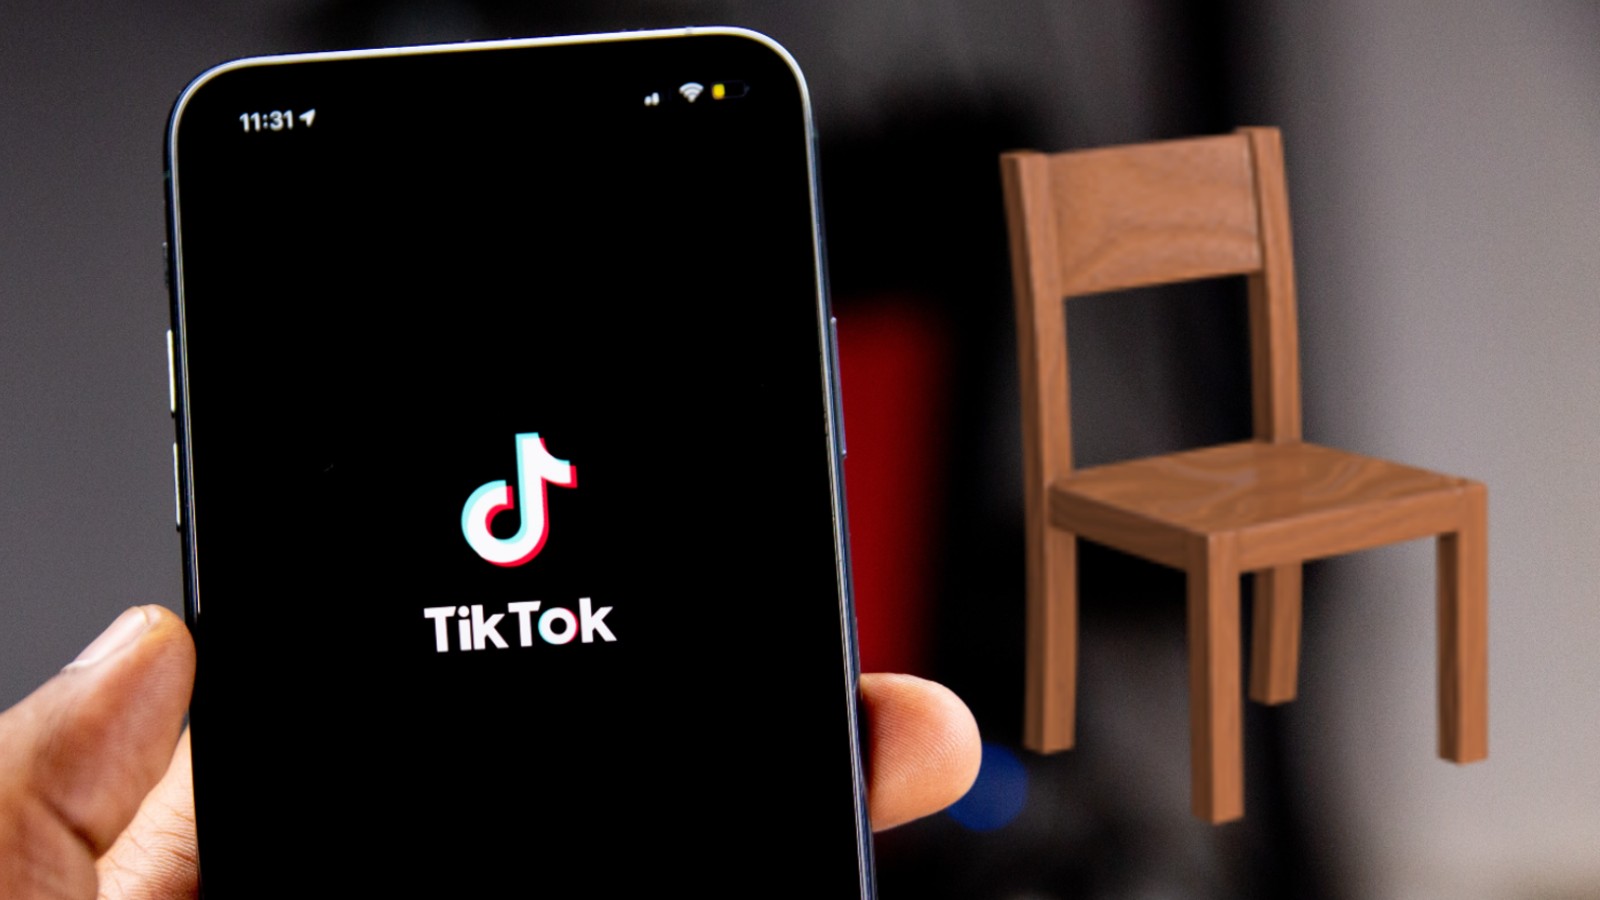 What Does Chair Mean on Tik Tok?